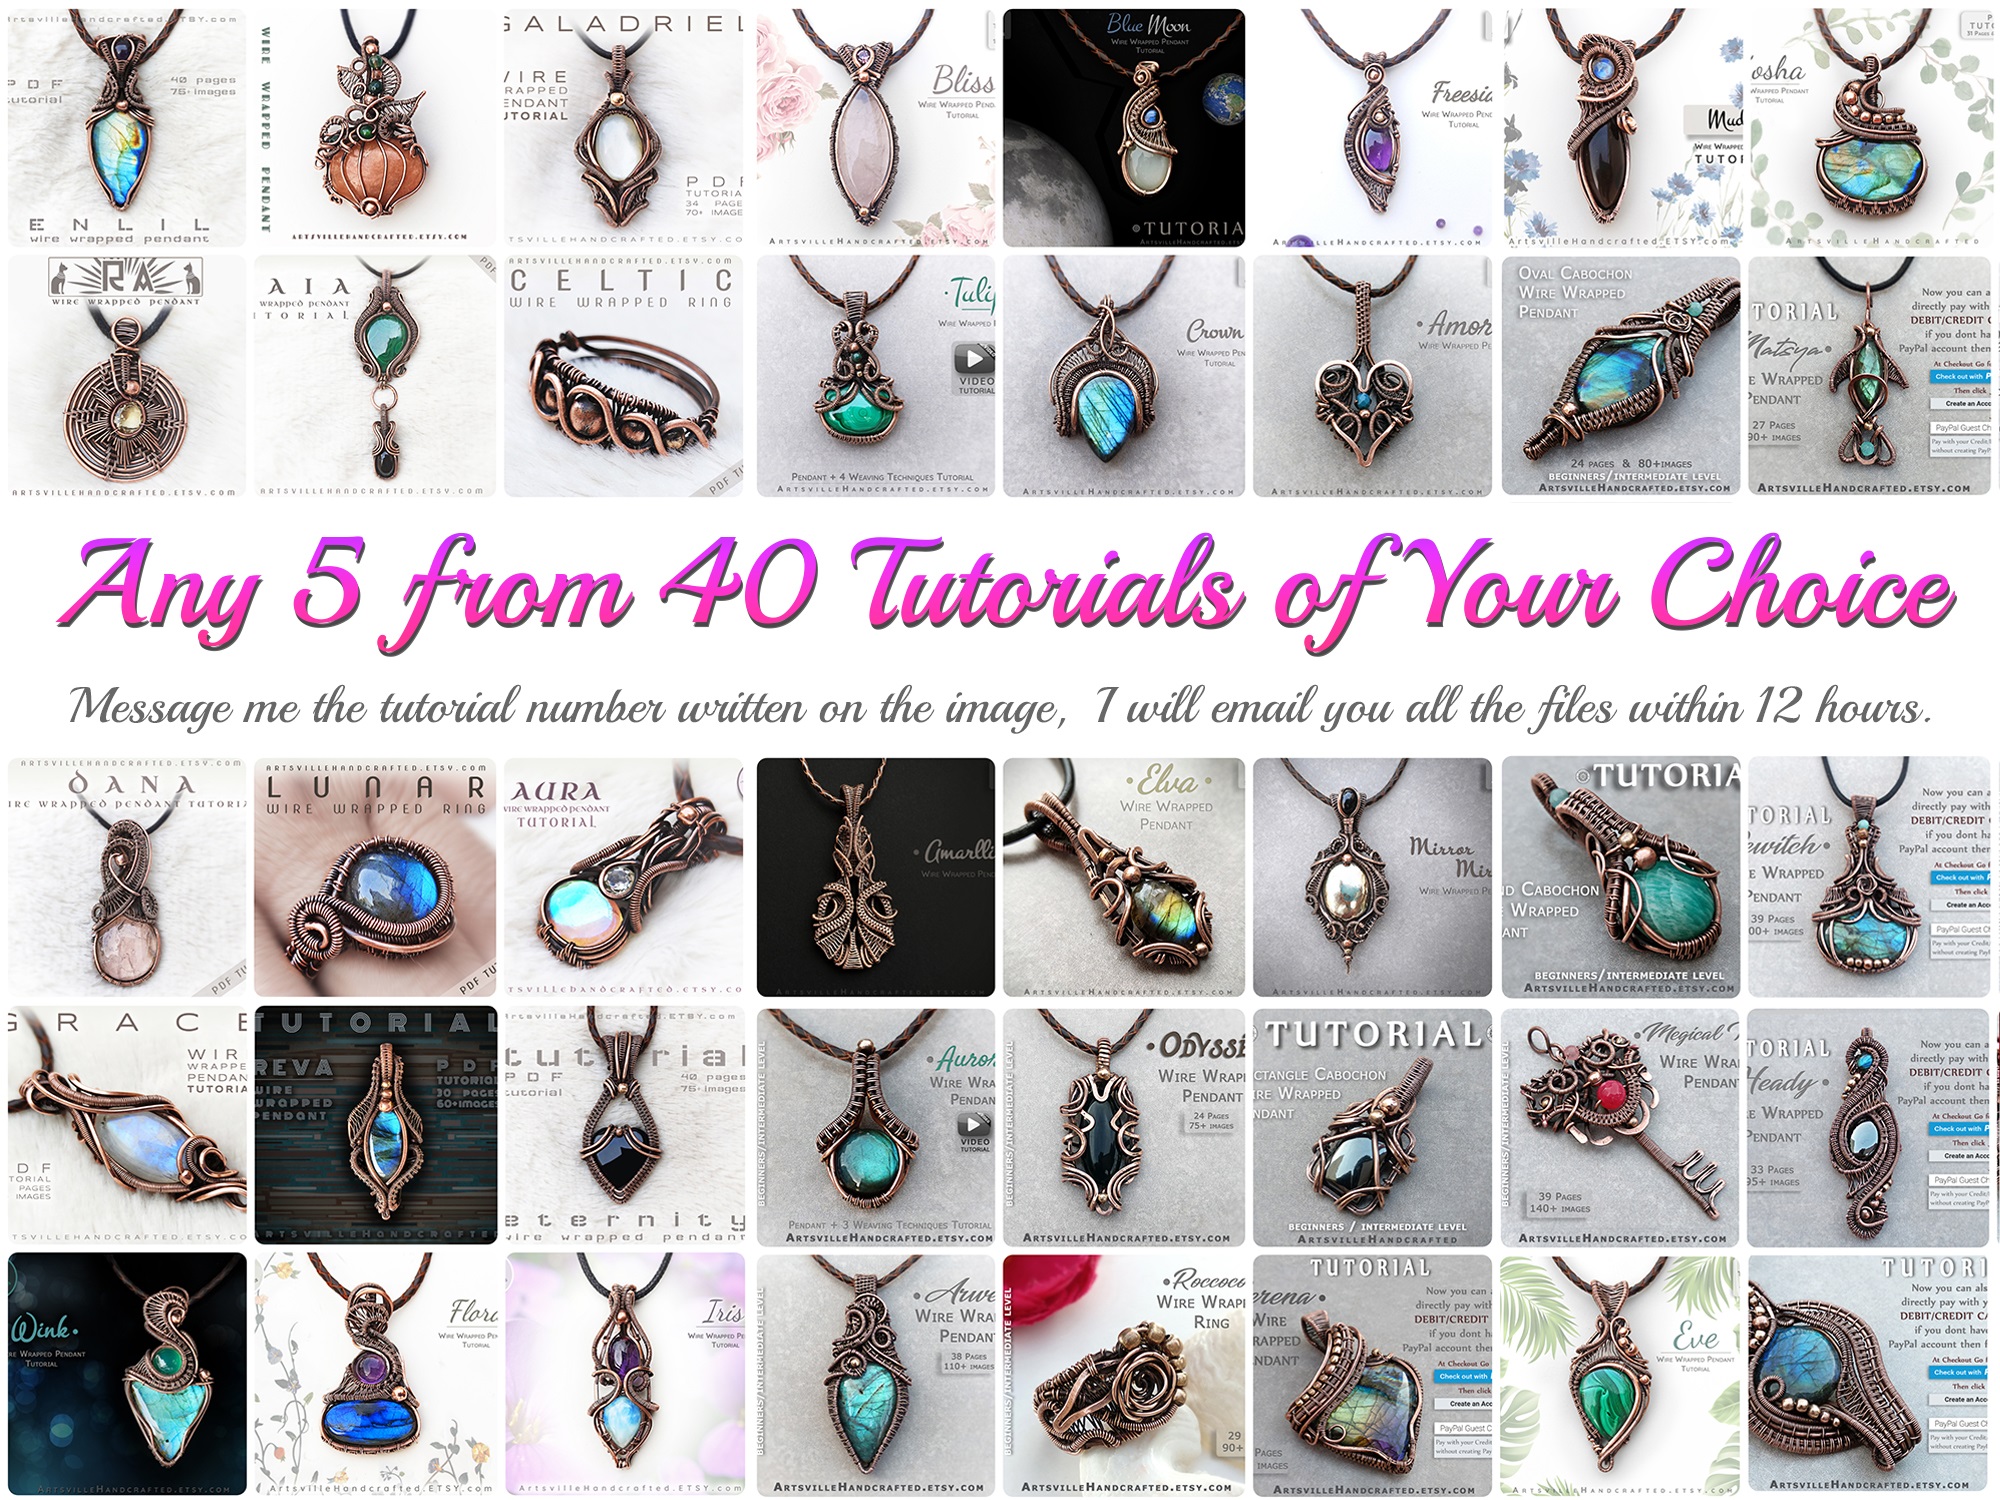 The Ultimate Wire Wrapping Tutorial for Beginners – New Hobby Box